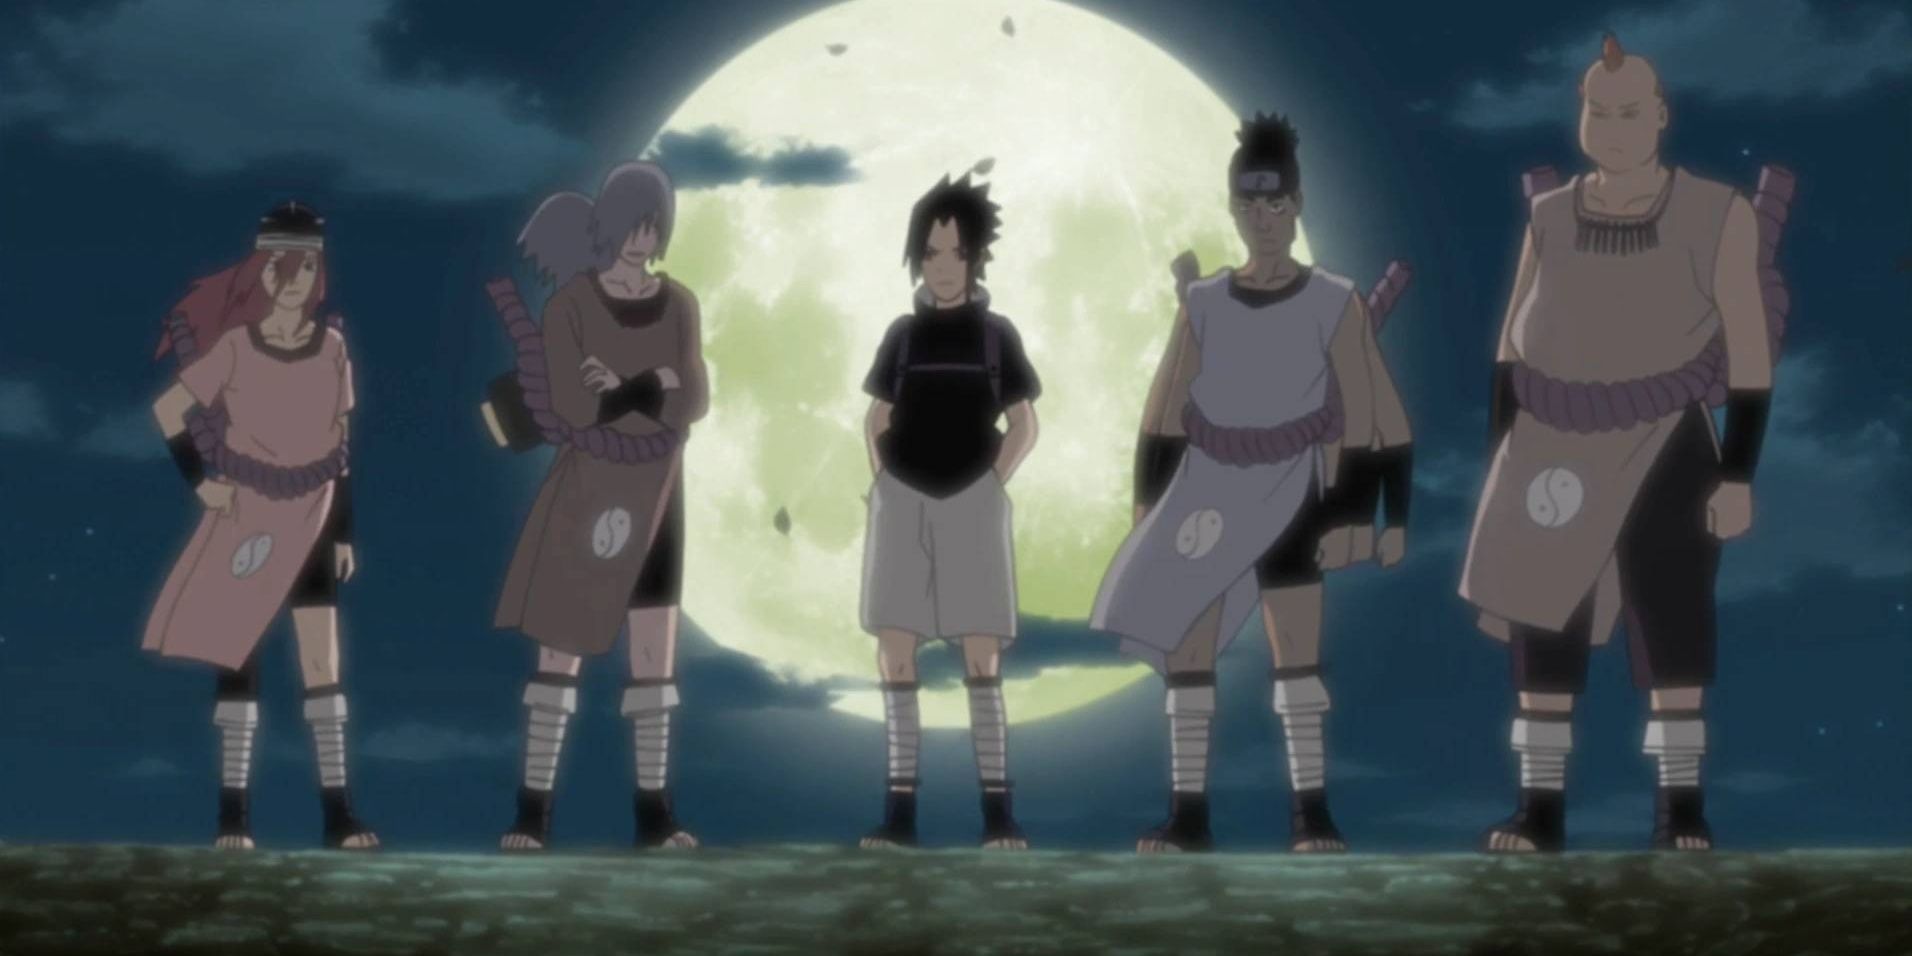 Sasuke and Sound Four in the moonlight